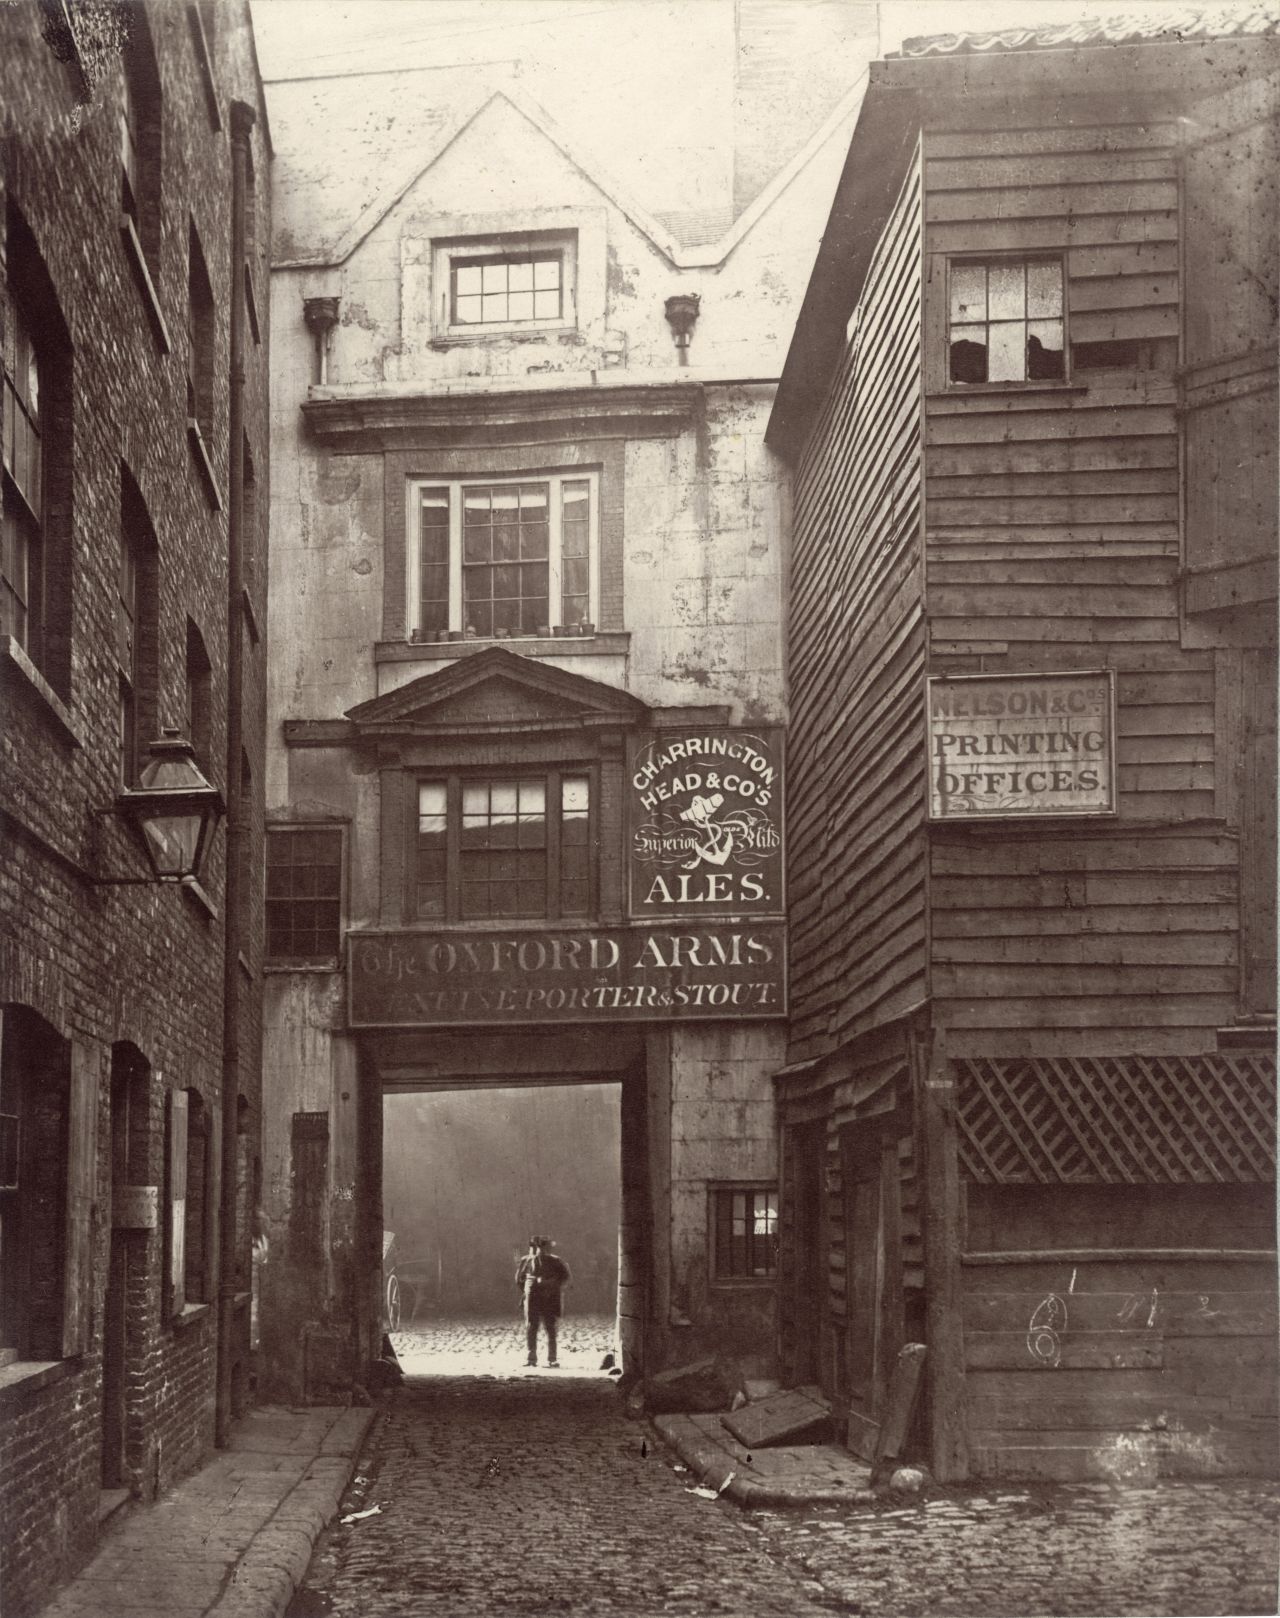 The Oxford Arms inn, demolished in 1876, was typical of the "ancient hostelries" that had "degenerated into little more than the abiding and booking-places of country wagons," according to Dickens.